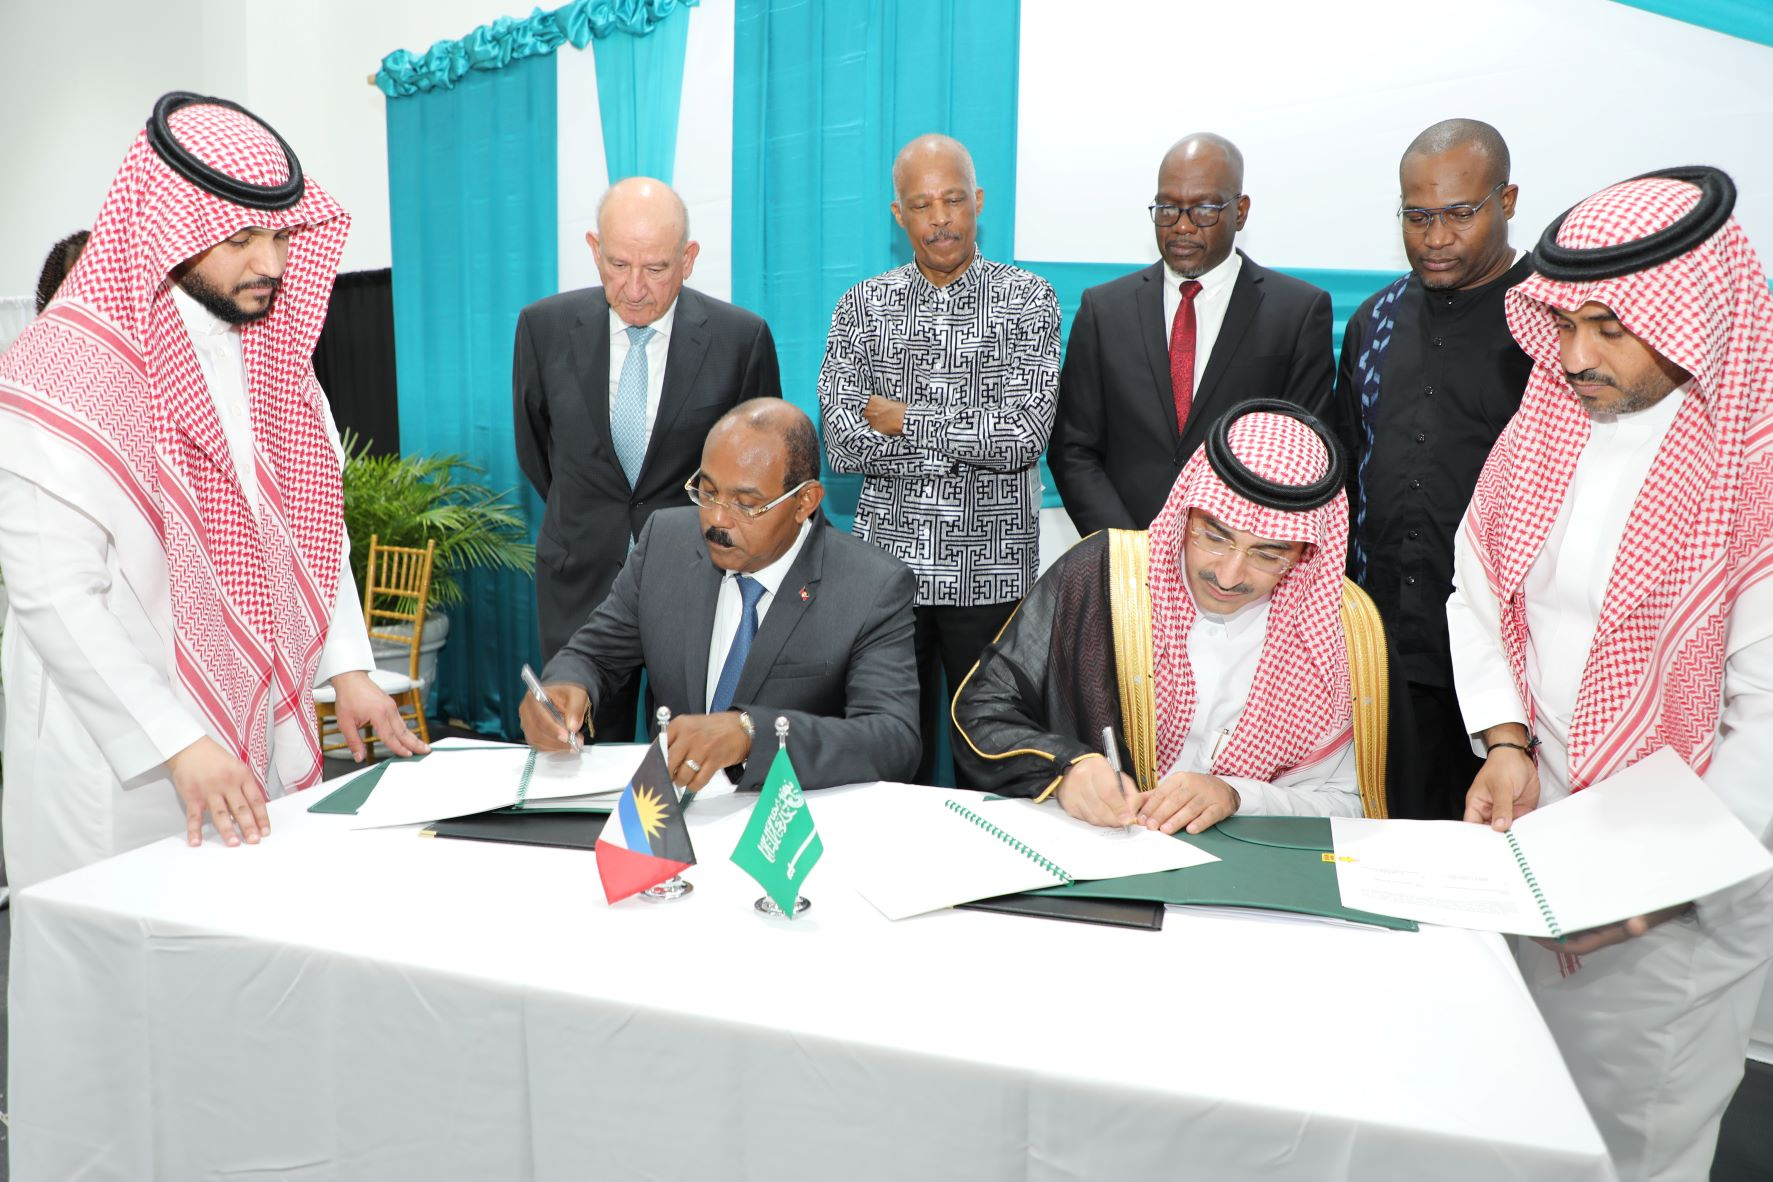 Saudi Fund for Development Expands Operations in the Caribbean Countries With Agreement to Fund Expansion Project of University of the West Indies at Five Islands in Antigua and Barbuda | Business Wire